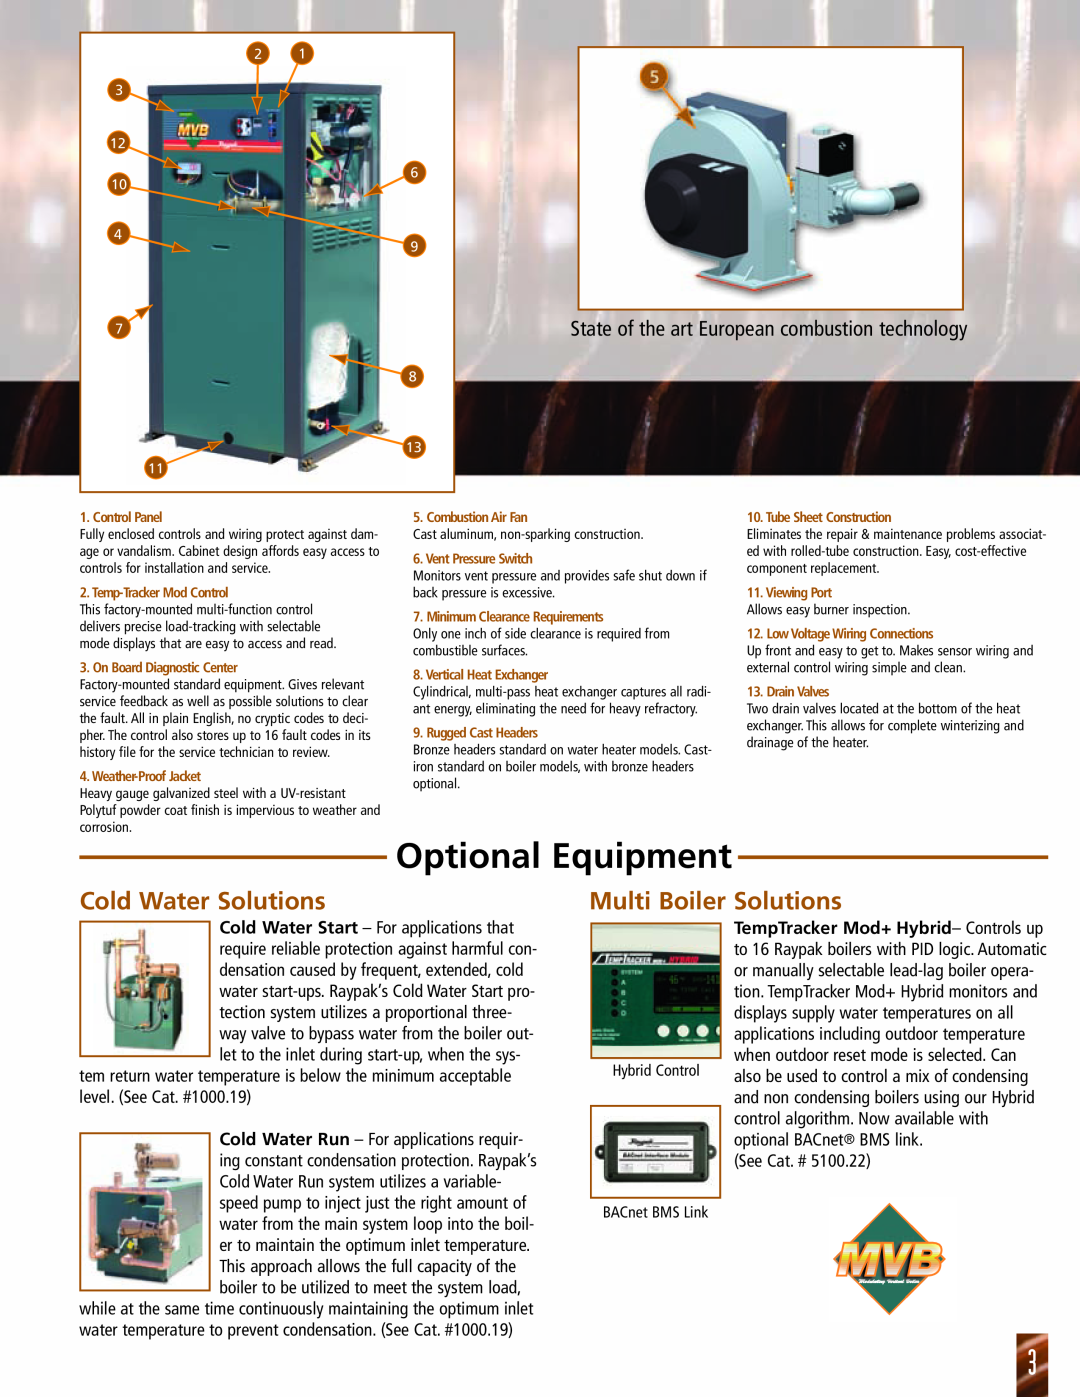 Raypak 503 manual Cold Water Solutions, Multi Boiler Solutions, Optional Equipment, BACnet BMS Link, 2 3 12 6 10 4 9 